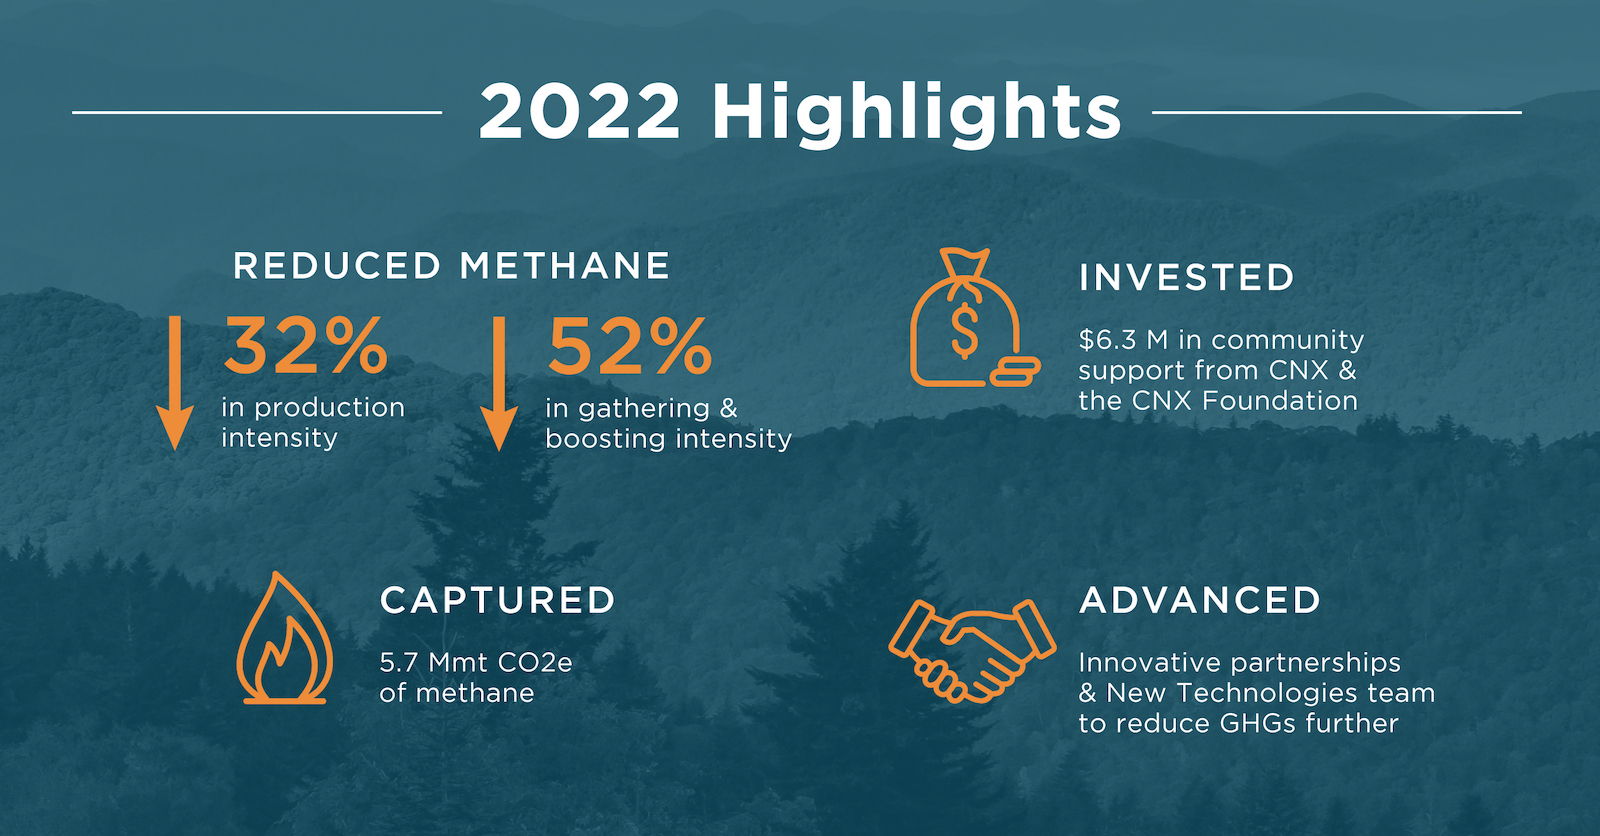 View the 2022 Corporate Sustainability Report.